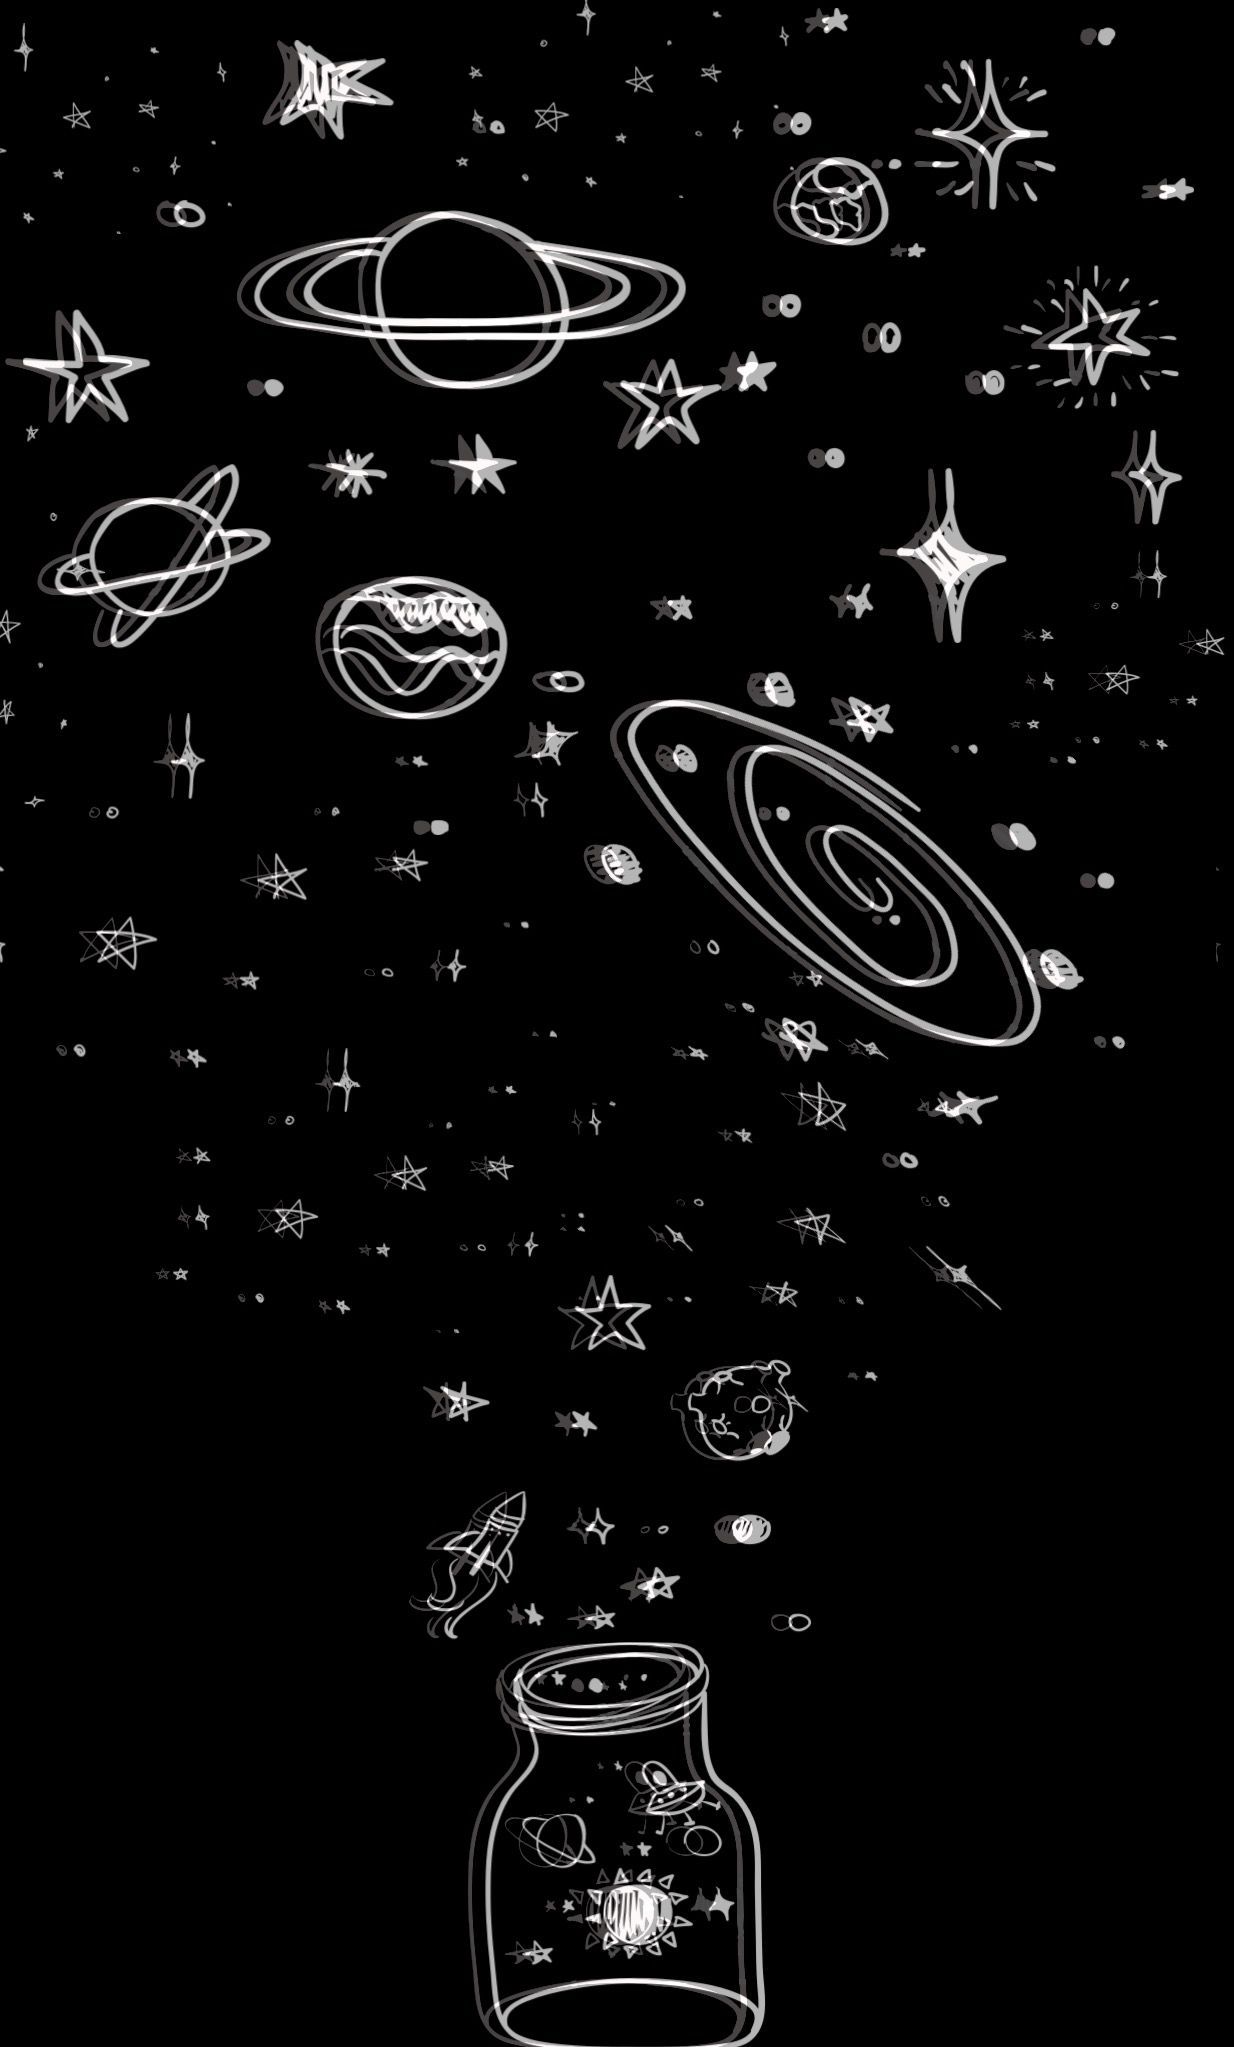 A jar of stars and planets floating in space - Doodles, space, science, black phone